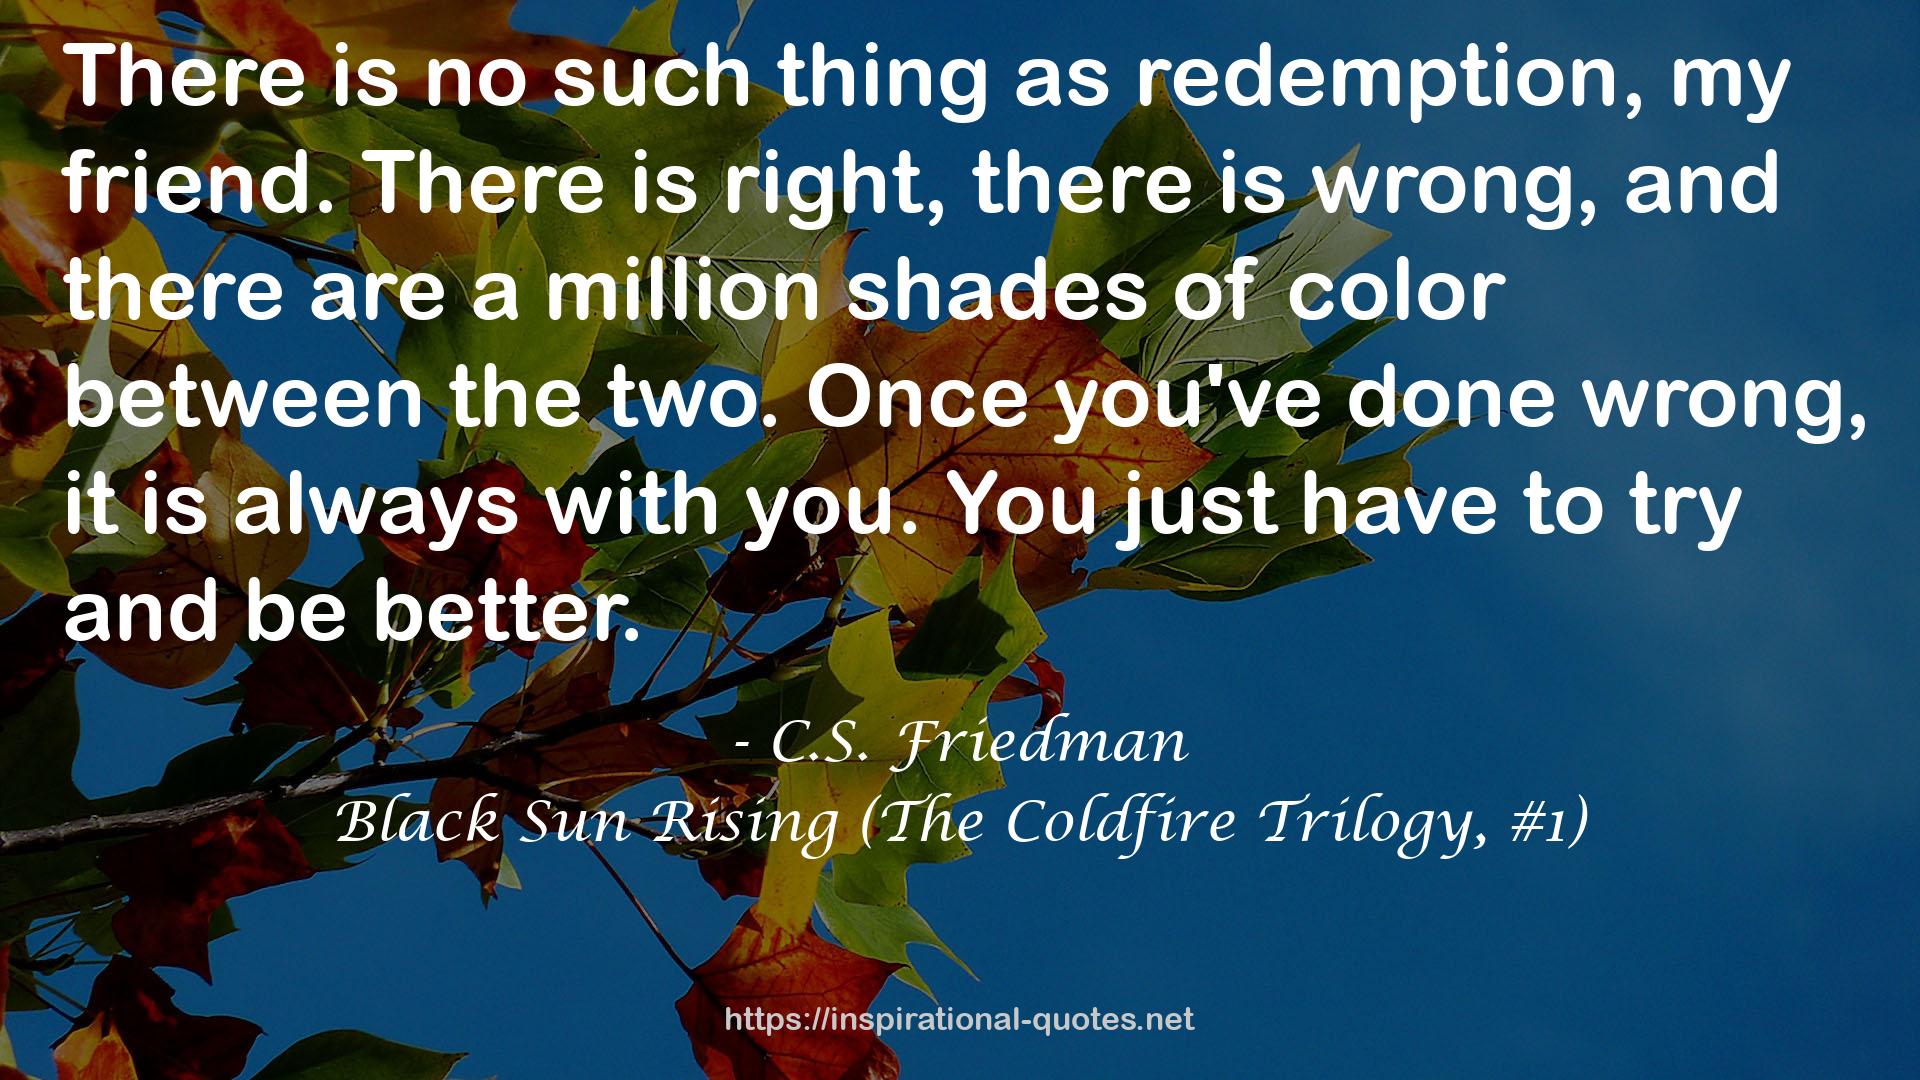 Black Sun Rising (The Coldfire Trilogy, #1) QUOTES